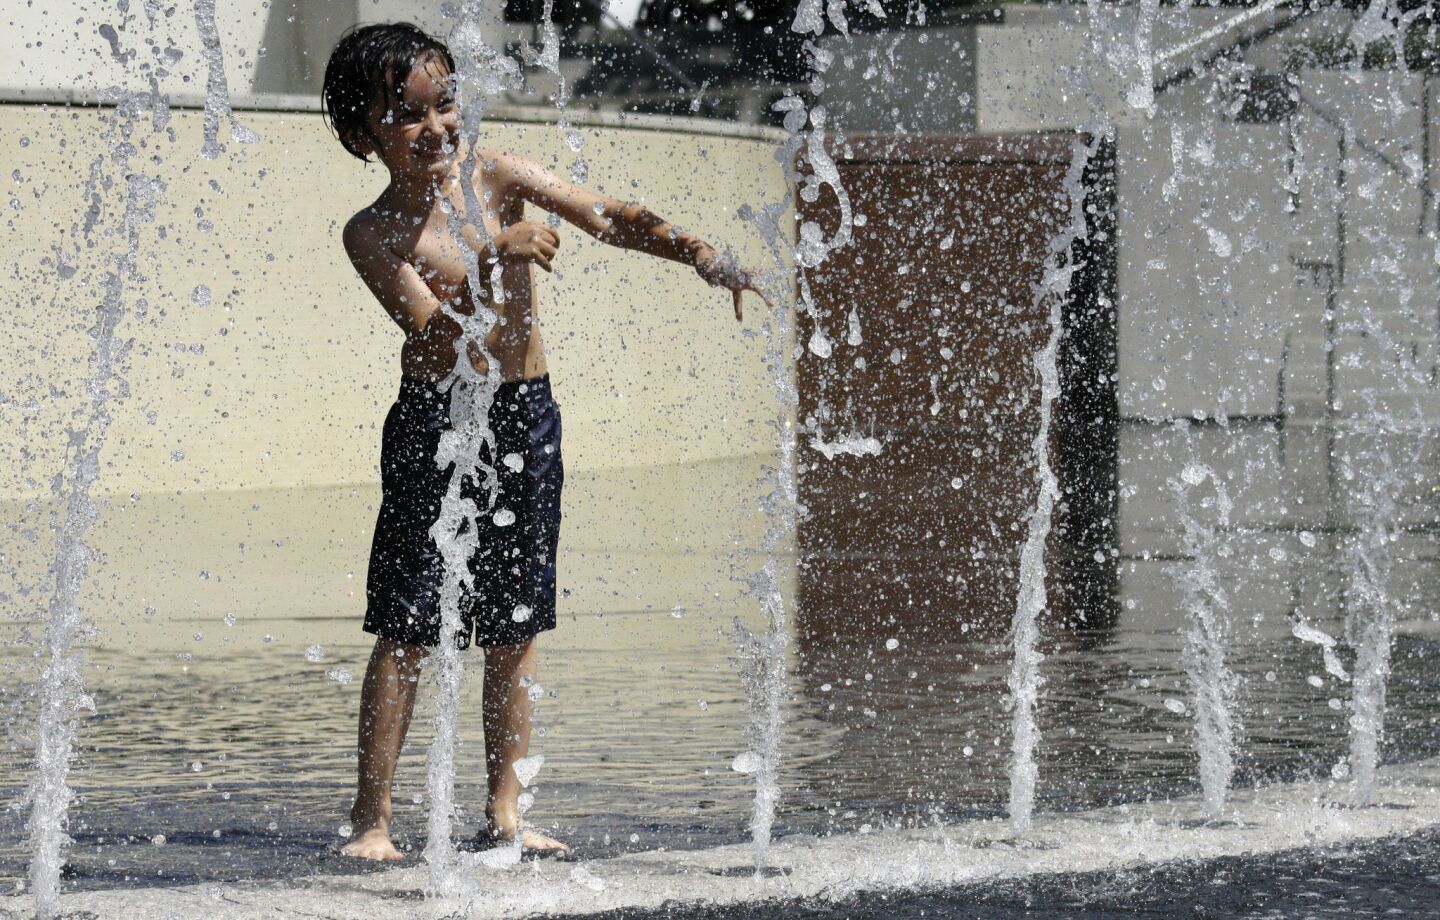 Leonardo Zenaidi, 5, plays in the fountain at Grand Park in downtown Los Angeles as temperatures continue to climb Friday.